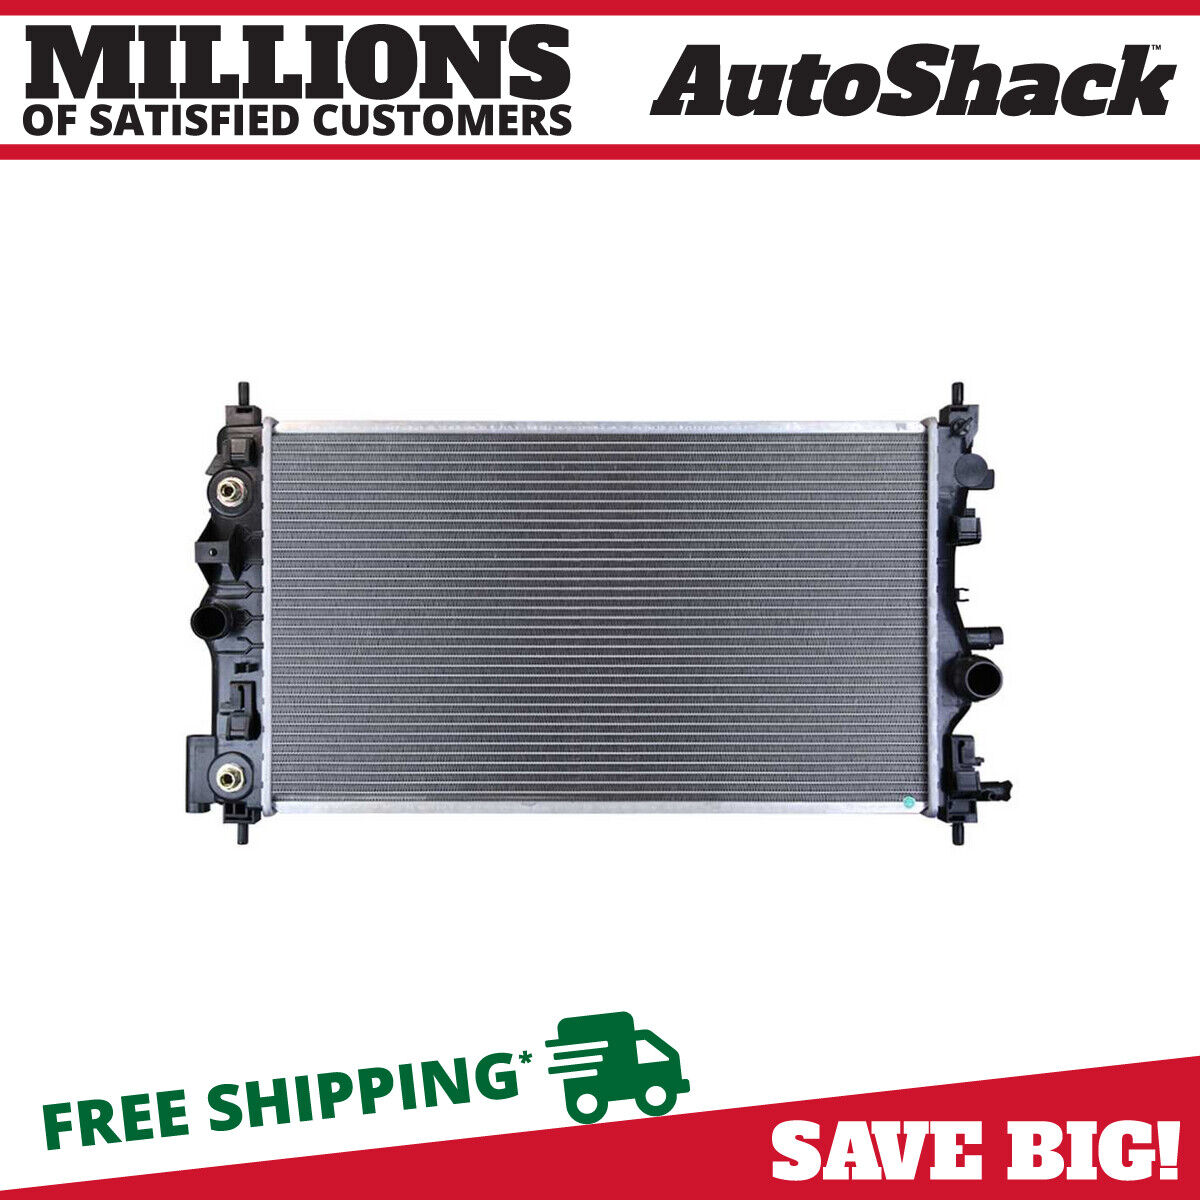 Radiator for 2011 2012 2013 2014 2015 Chevy Cruze 2016 Cruze Limited 1.4L 1.8L